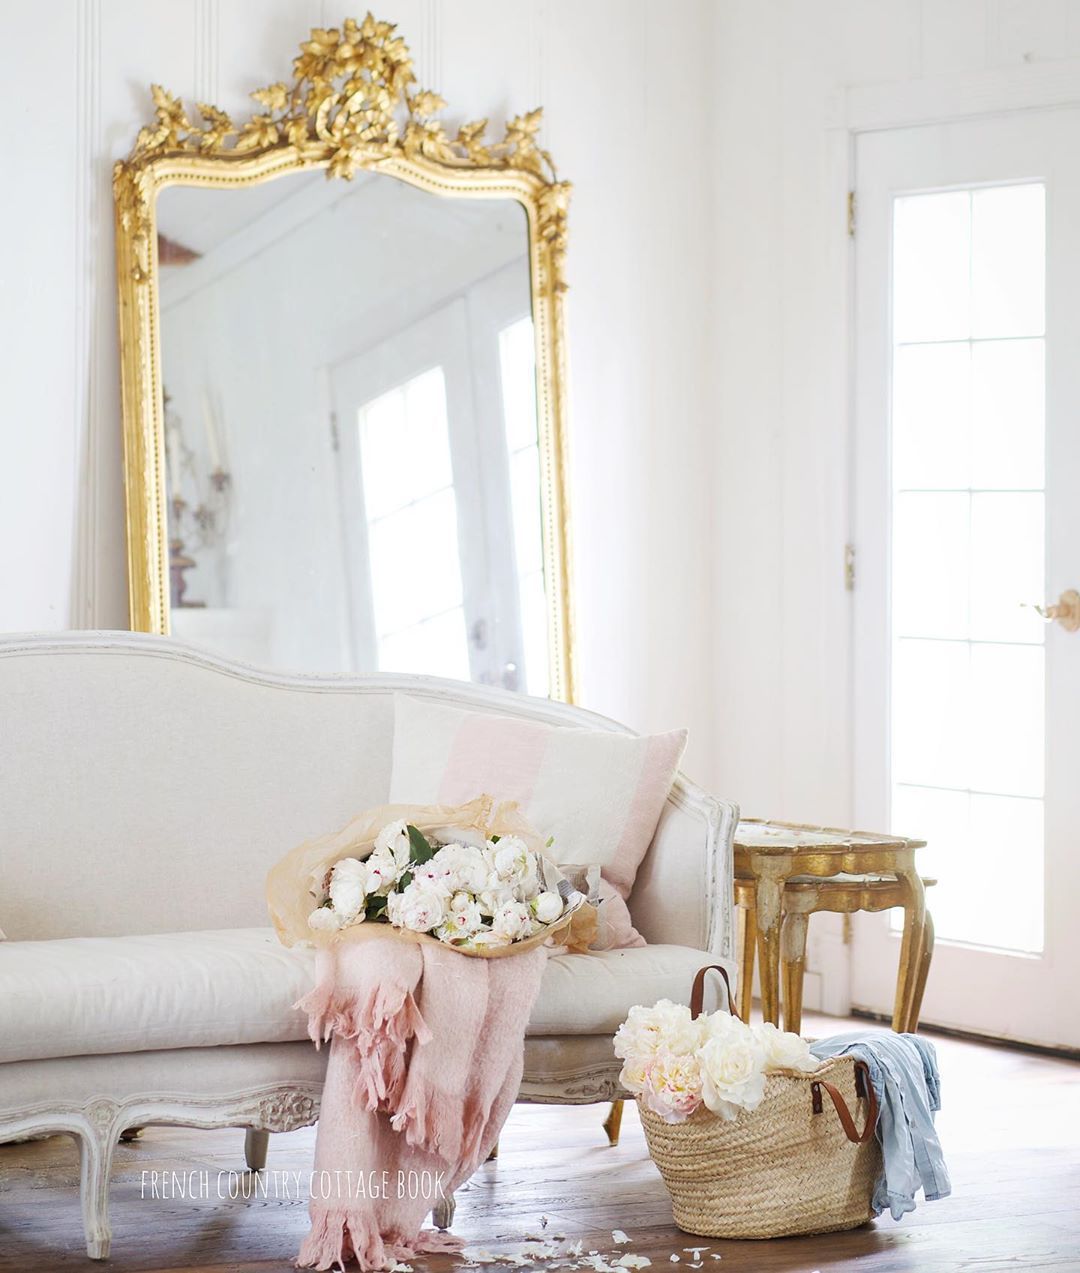 French Country Living Room with Vintage Sofa and Gold Leaning Mirror via @frenchcountrycottage